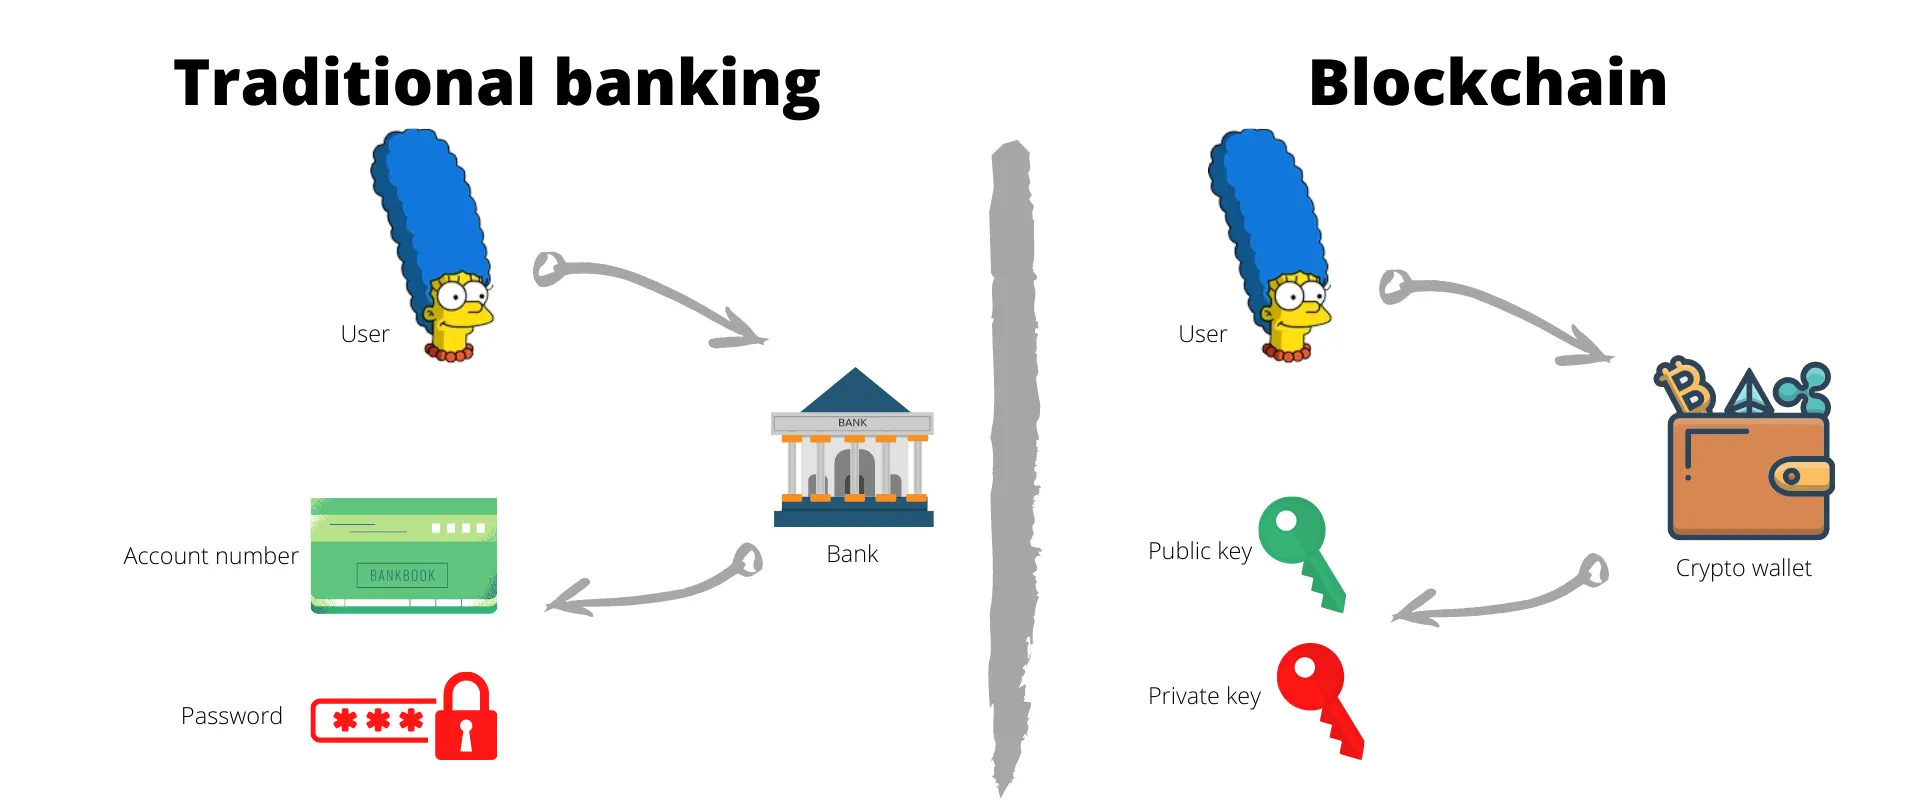 Comparing the elements of traditional banking to blockchain